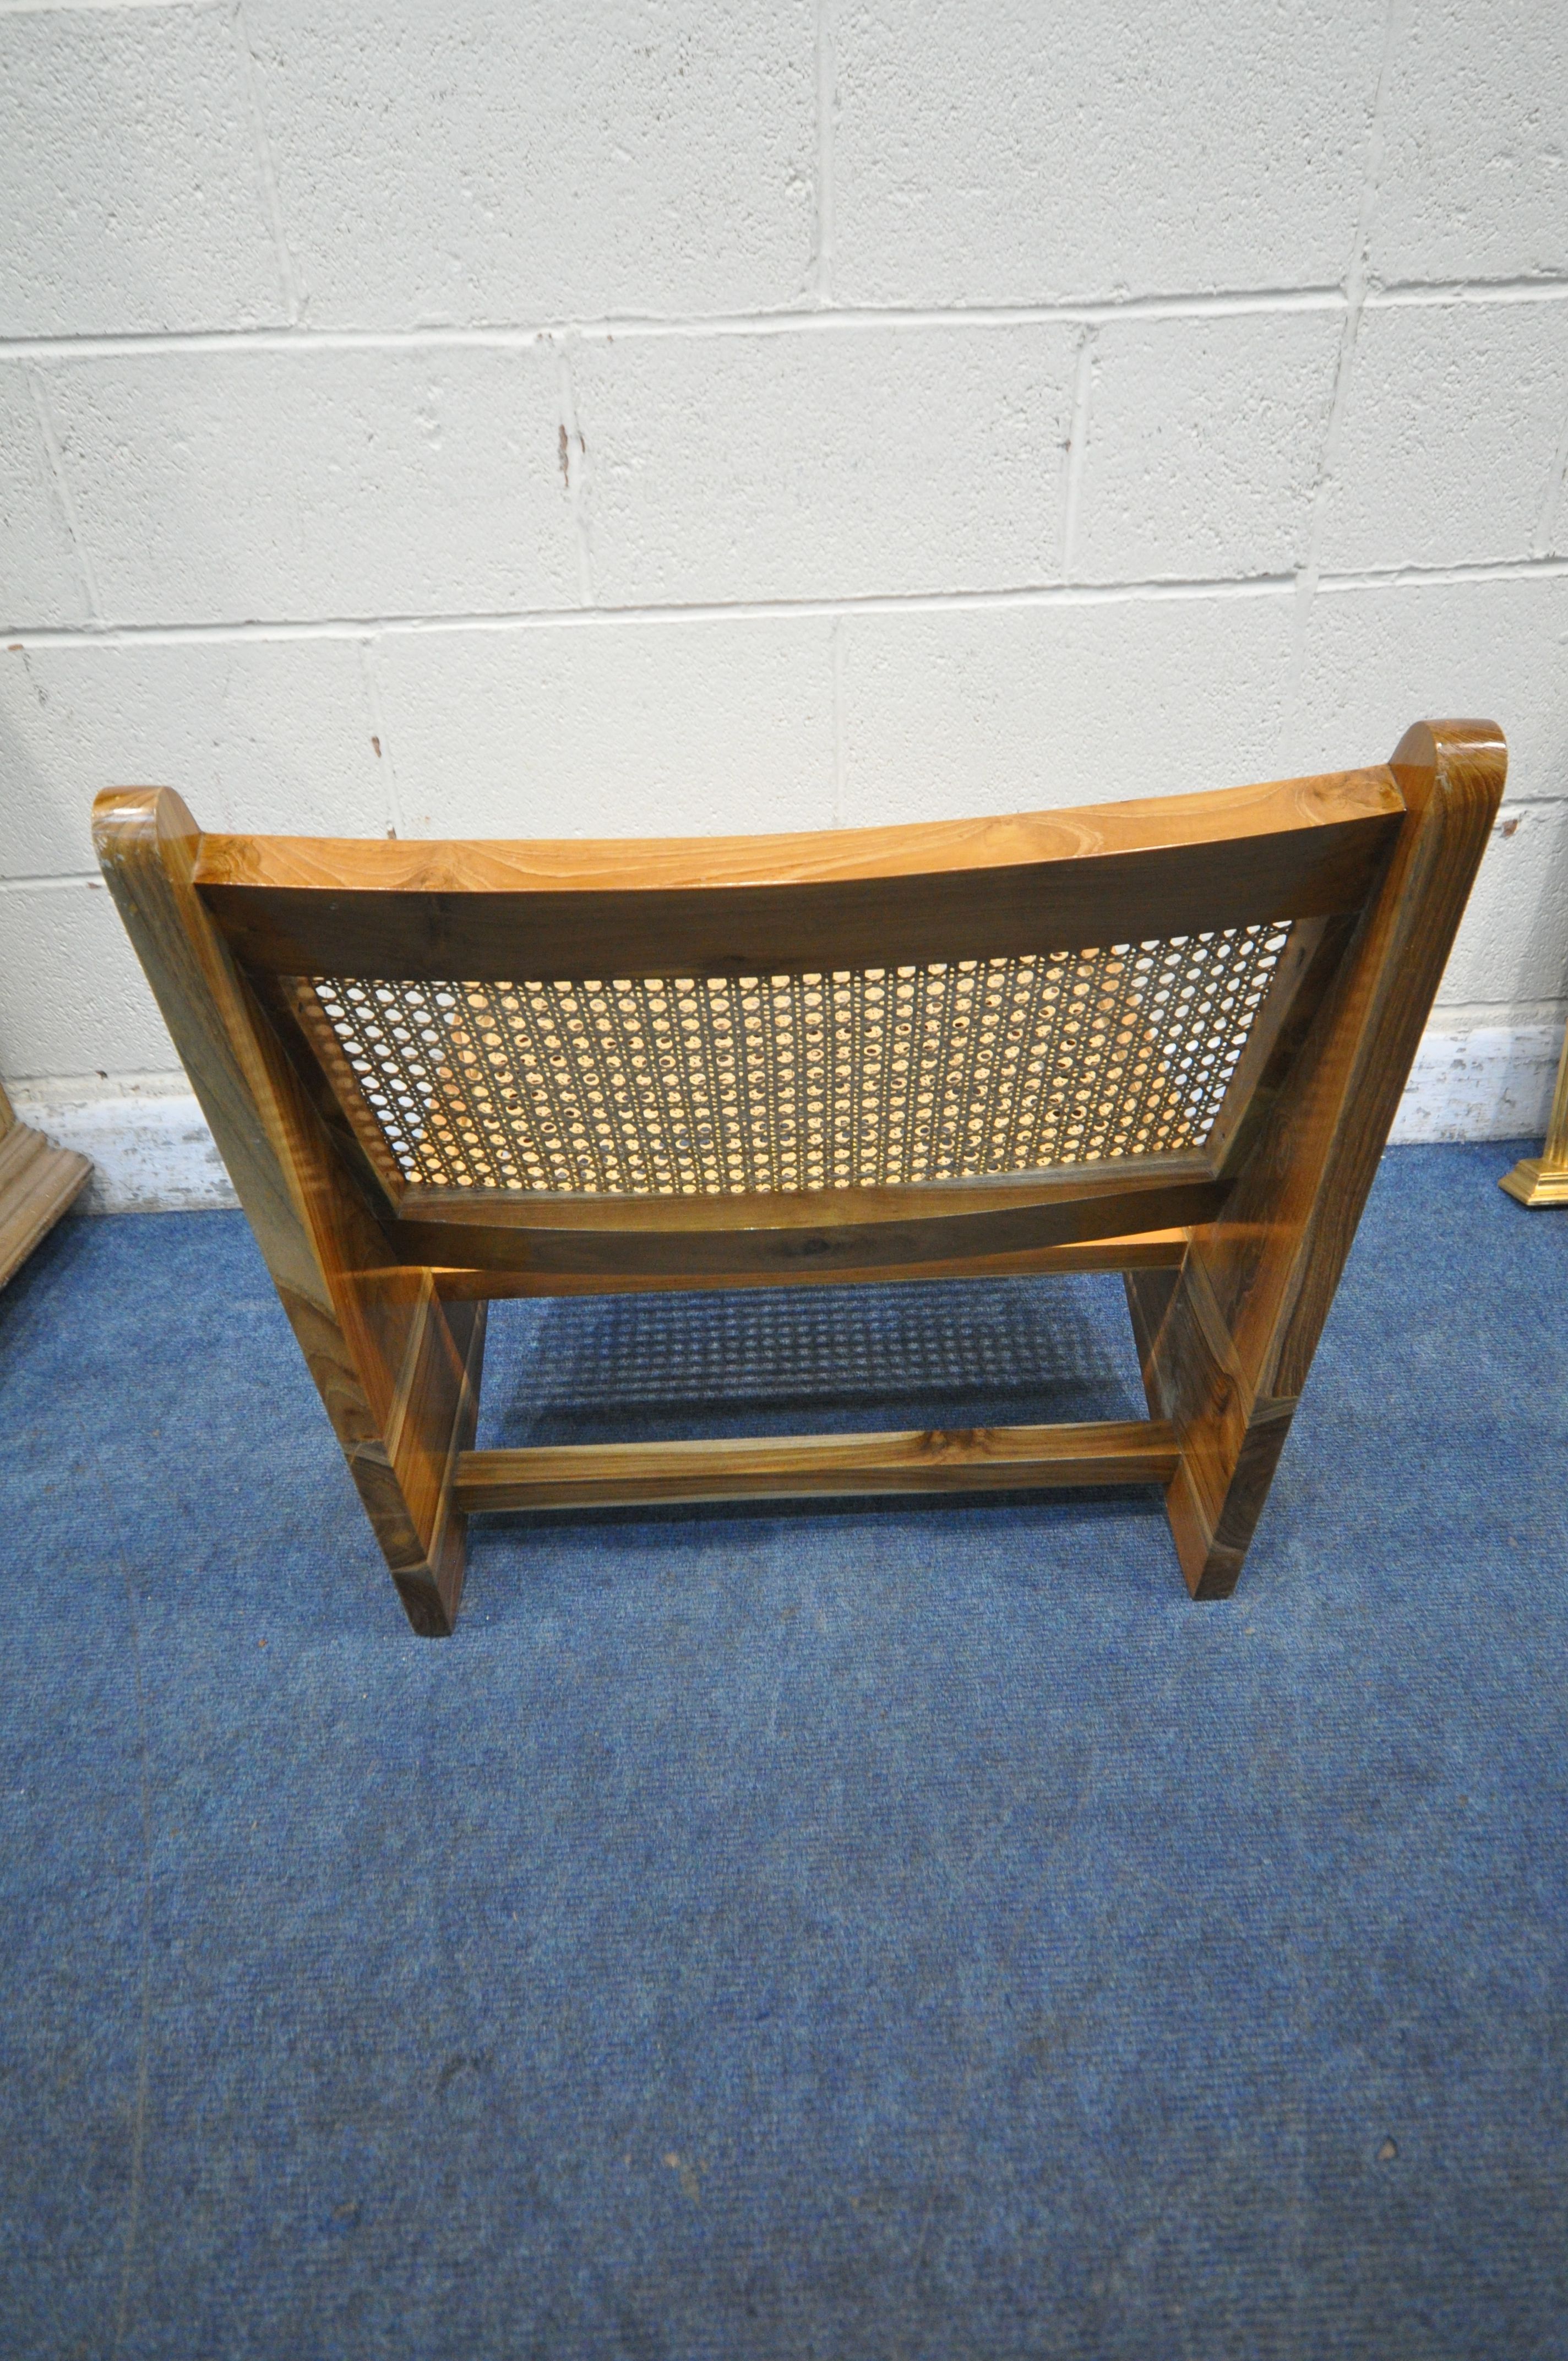 IN THE MANNER OF PIERRE JEANNERET FOR CHANDIGARH, A MID CENTURY HARDWOOD KANGAROO CHAIR, with cane - Image 3 of 5